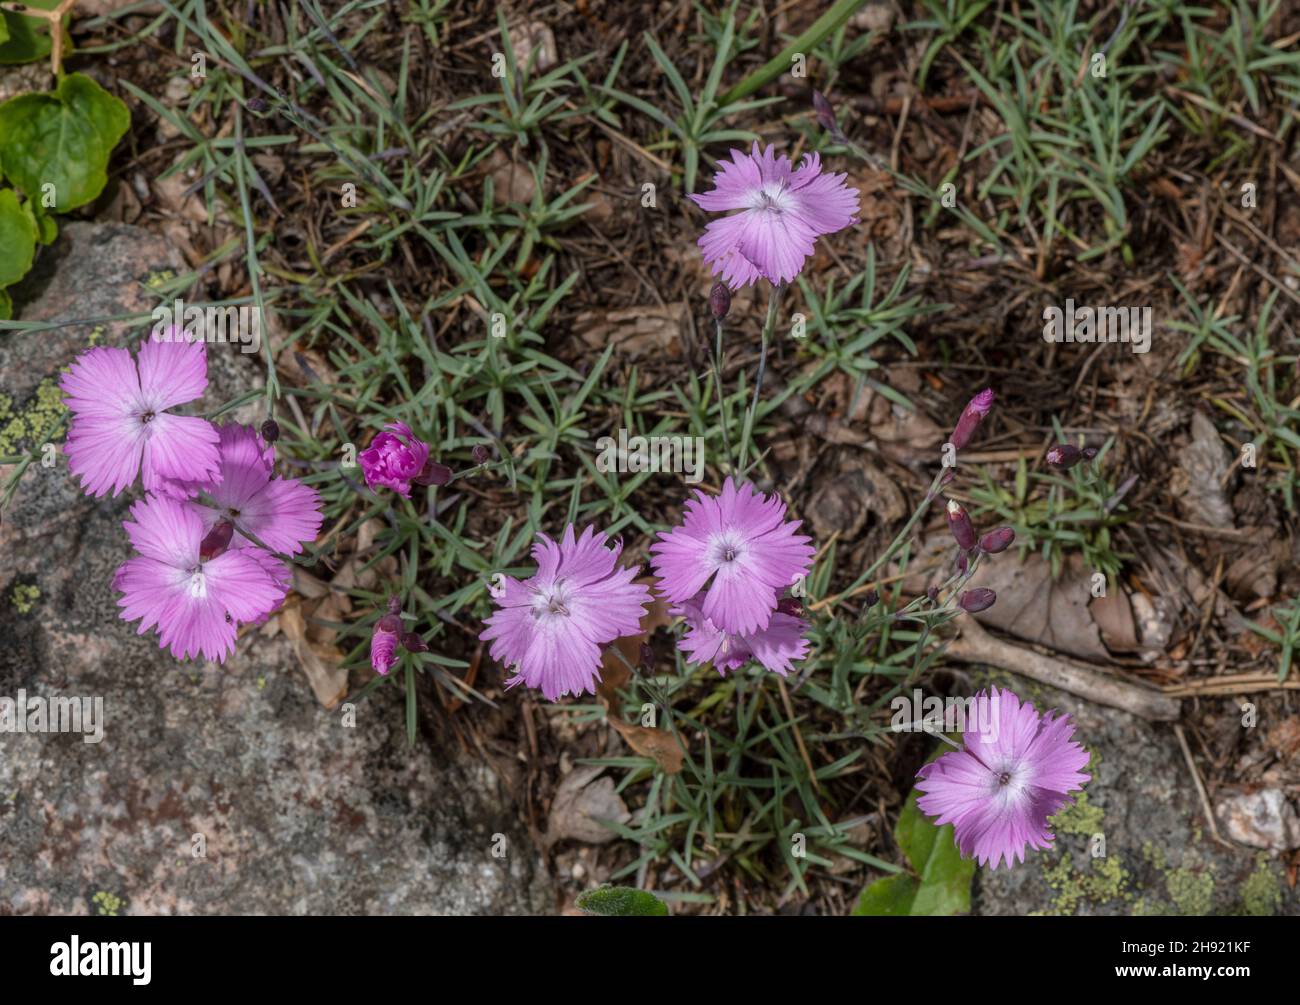 Cheddar pink, Dianthus gratianopolitanus, in flower on stony bank. Stock Photo